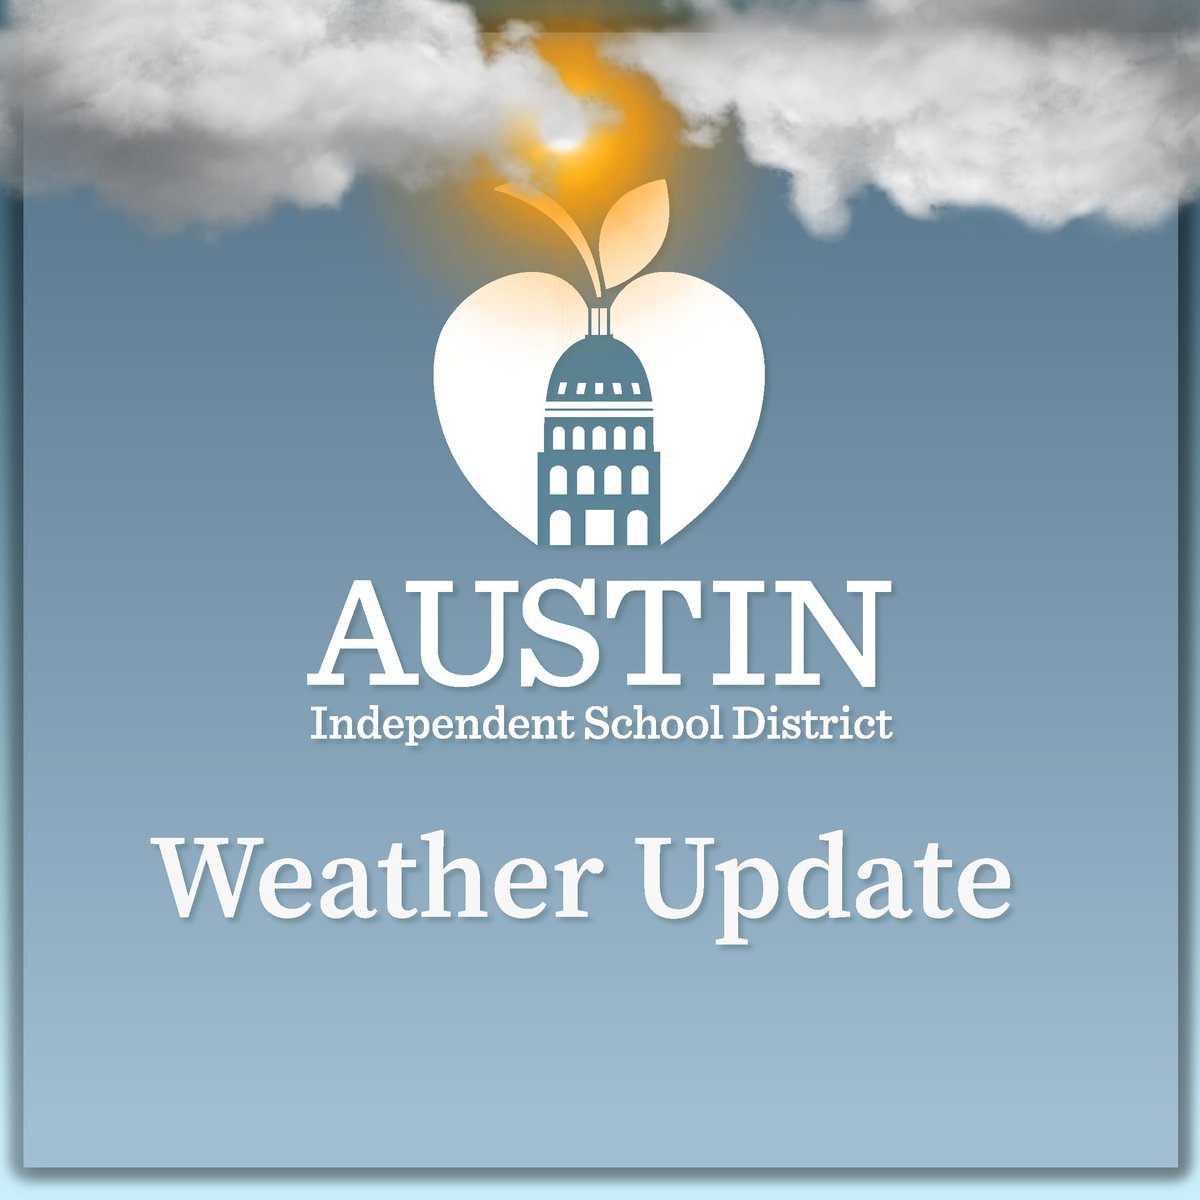 Weather Update All @AustinISD schools and offices are closed tomorrow, Jan. 31, and all classes are canceled. We will continue to monitor weather conditions and provide updates for Wednesday.